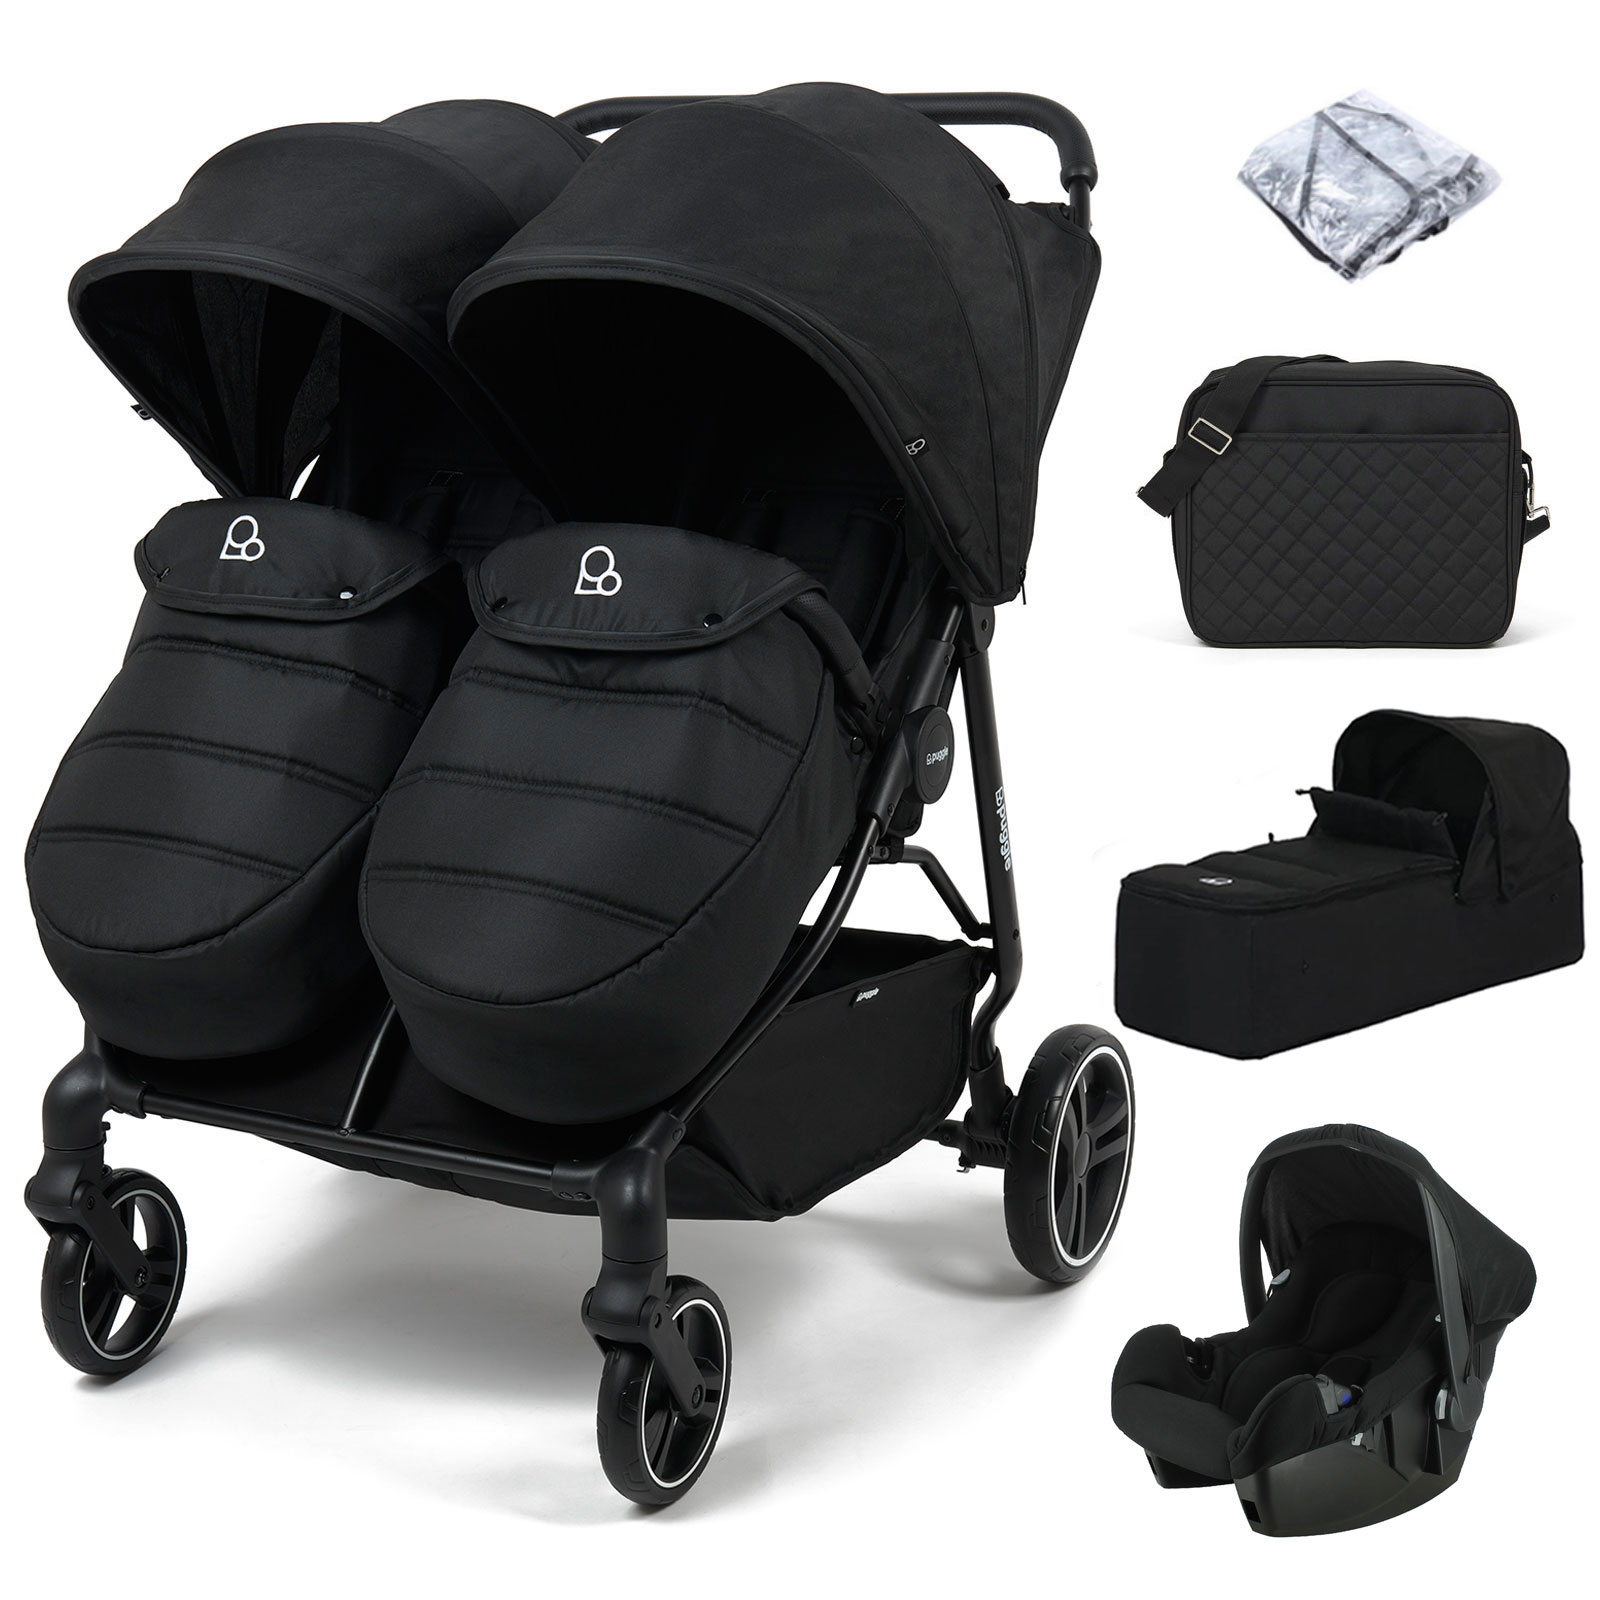 Puggle Urban City Easyfold Twin Pushchair with Footmuffs, Beone Car Seat, Soft Carrycot & Changing Bag - Storm Black